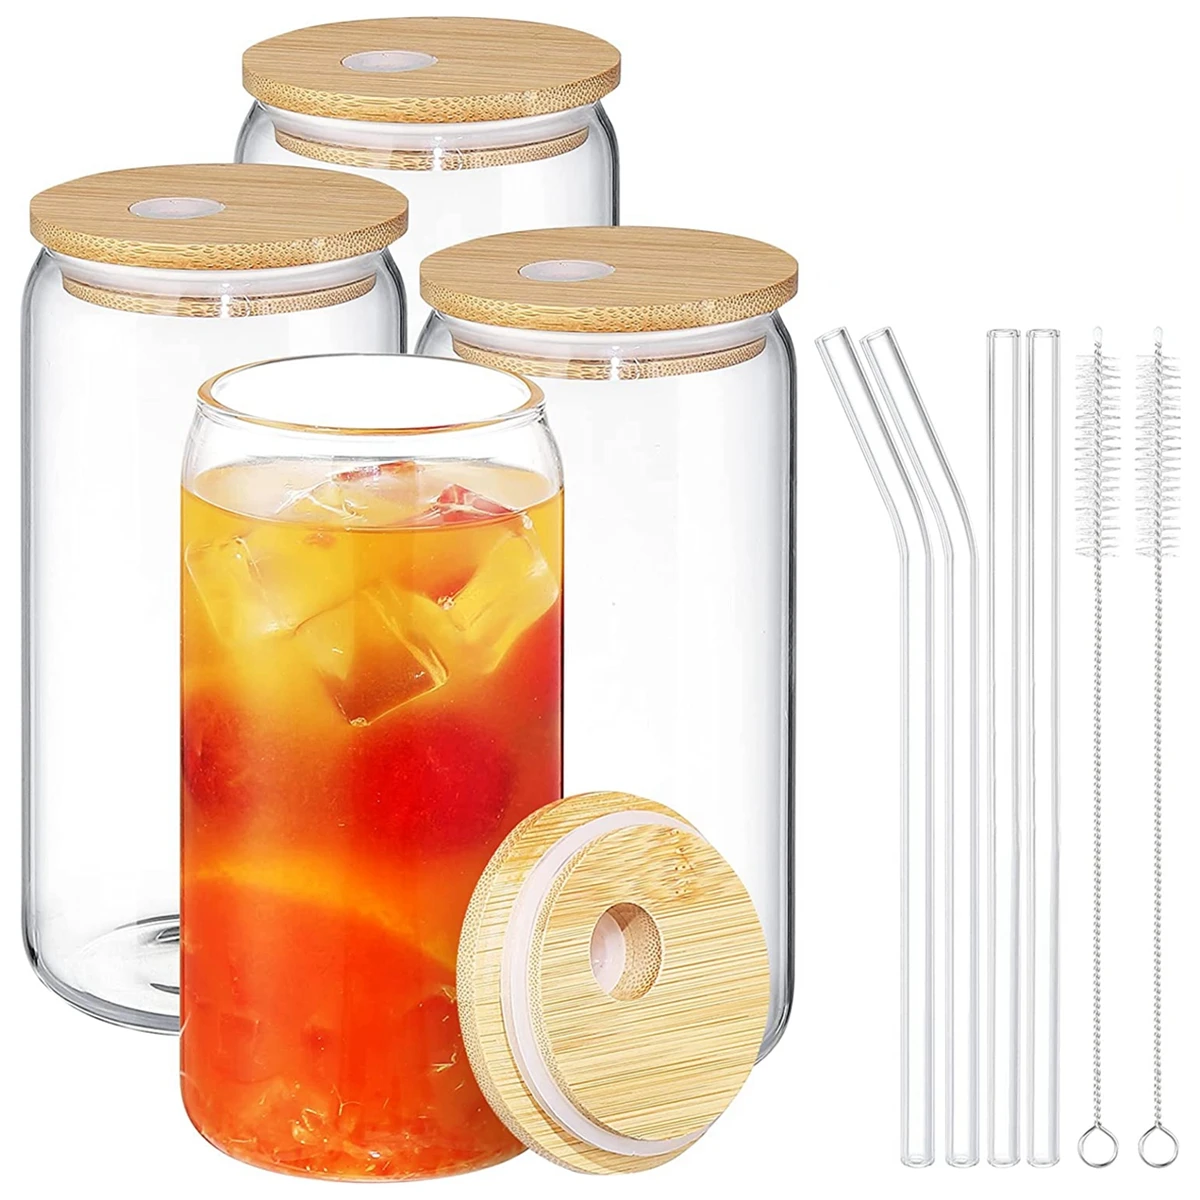 https://ae01.alicdn.com/kf/Sef1bfff8e511429f8e0f738eefc14bd7K/360-480ml-4Pcs-Glass-Cup-With-Lids-and-Straws-Reusable-Coke-Cup-Glasses-for-Juice-Beer.jpg